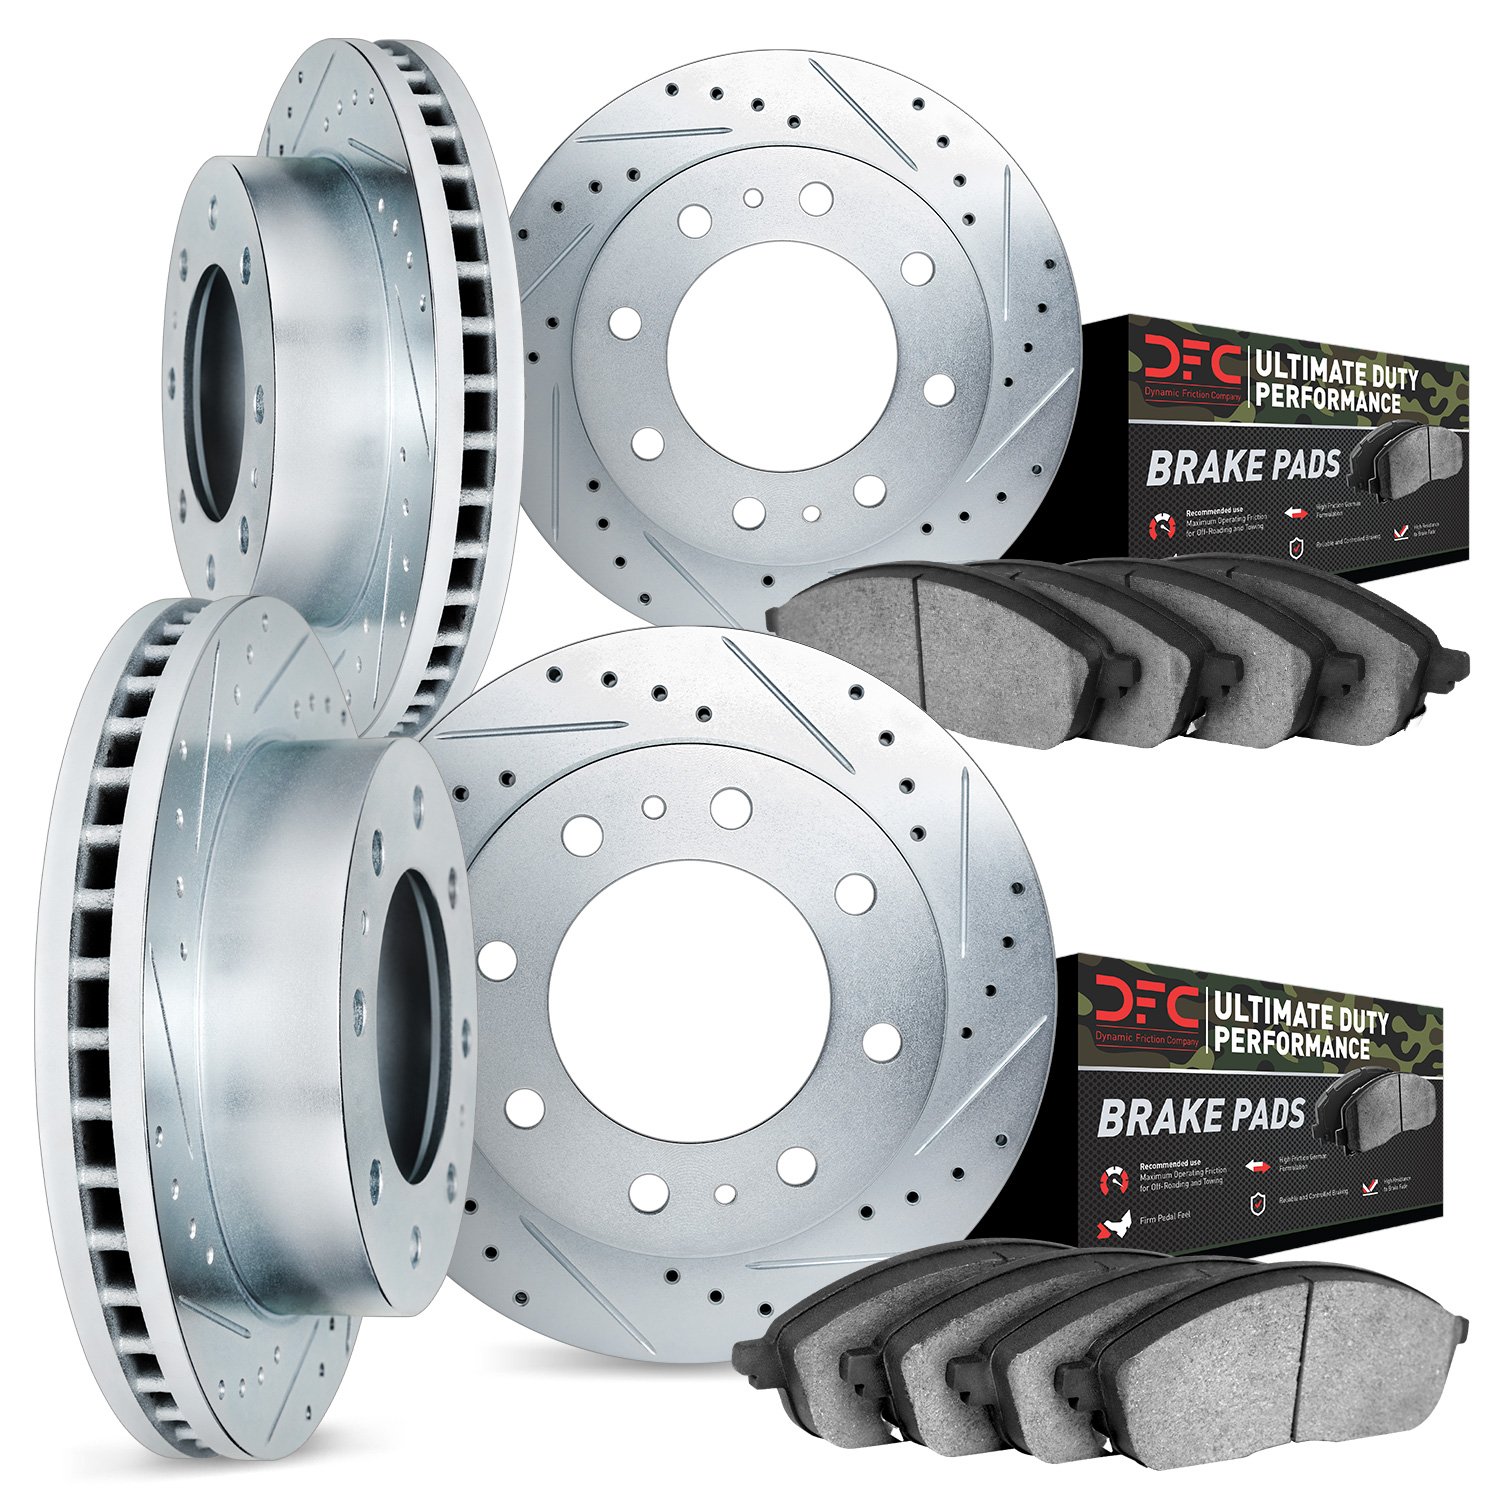 7404-54048 Drilled/Slotted Brake Rotors with Ultimate-Duty Brake Pads Kit [Silver], 2006-2010 Ford/Lincoln/Mercury/Mazda, Positi